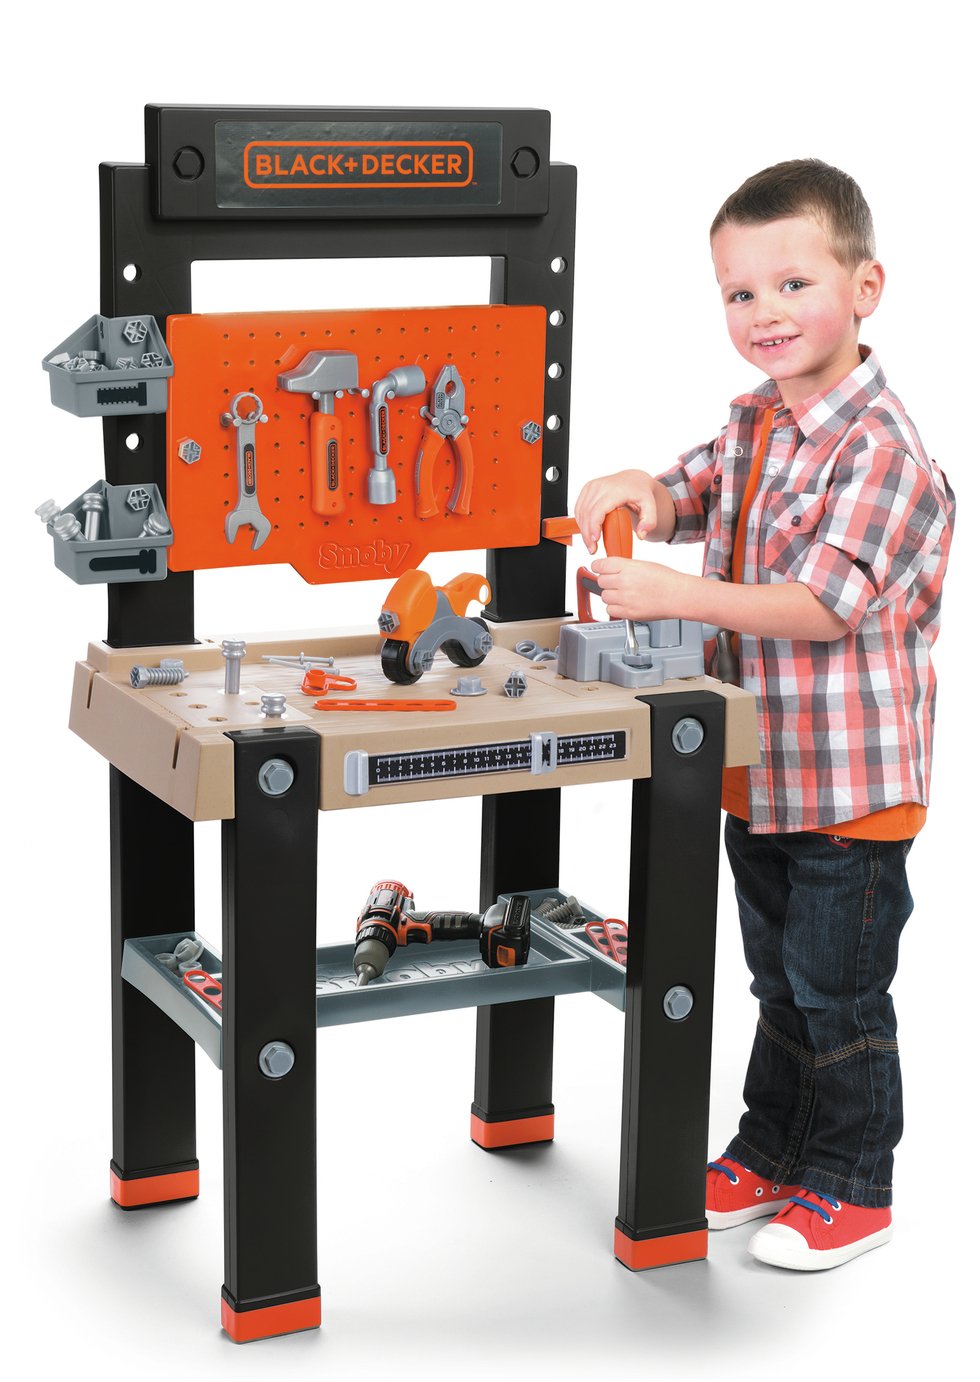 Smoby Giant Black and Decker Toy Workbench Review